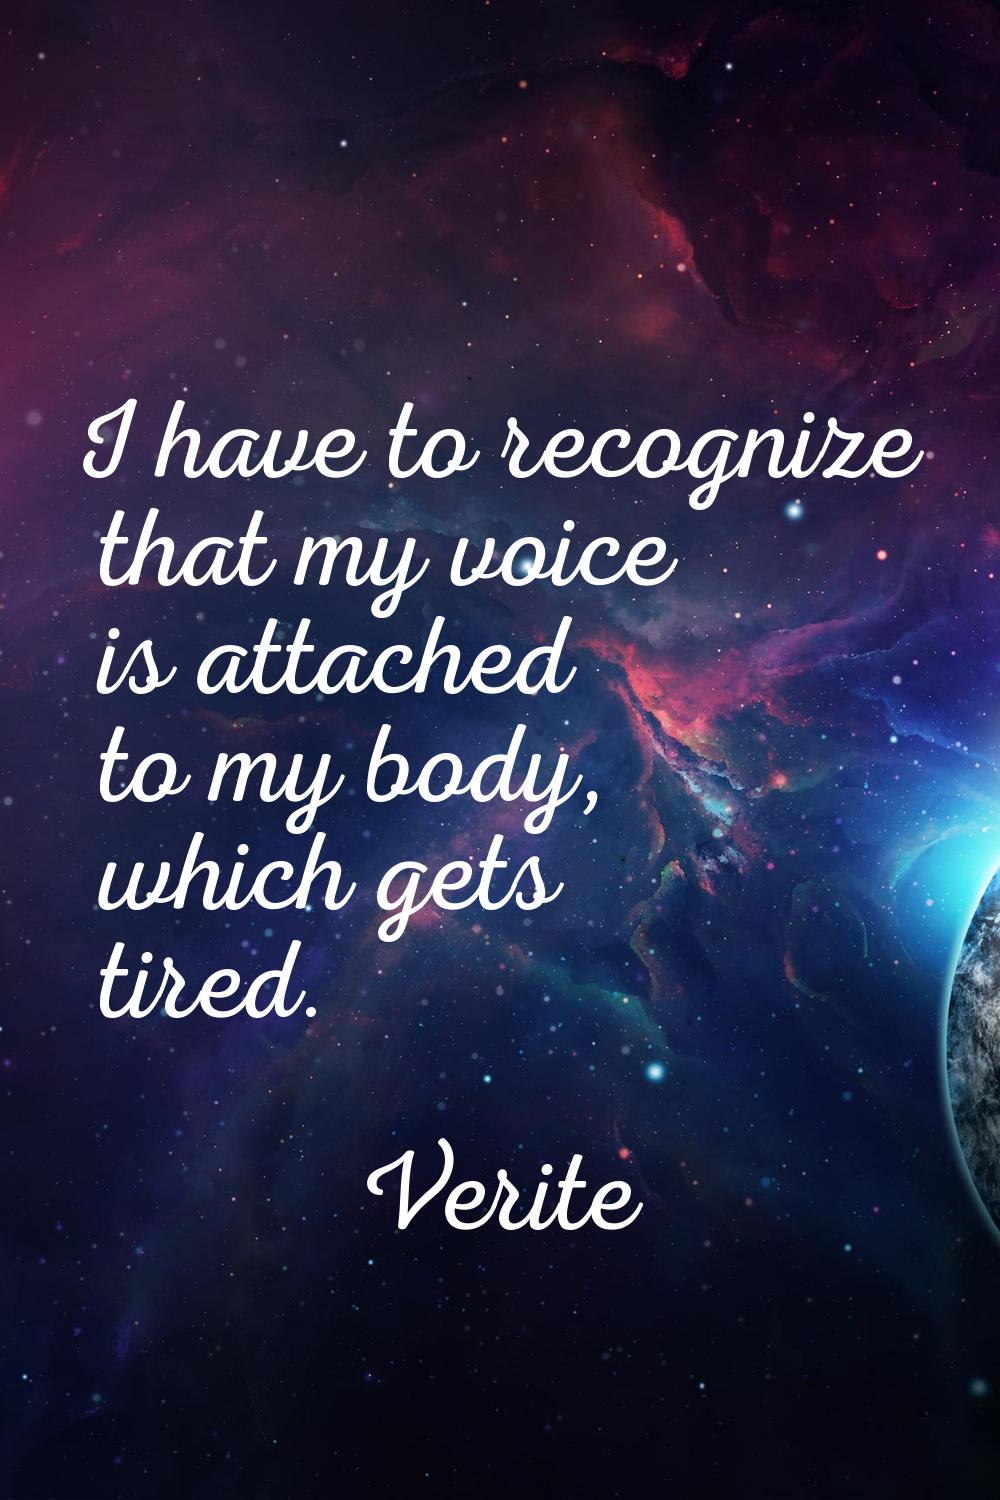 I have to recognize that my voice is attached to my body, which gets tired.